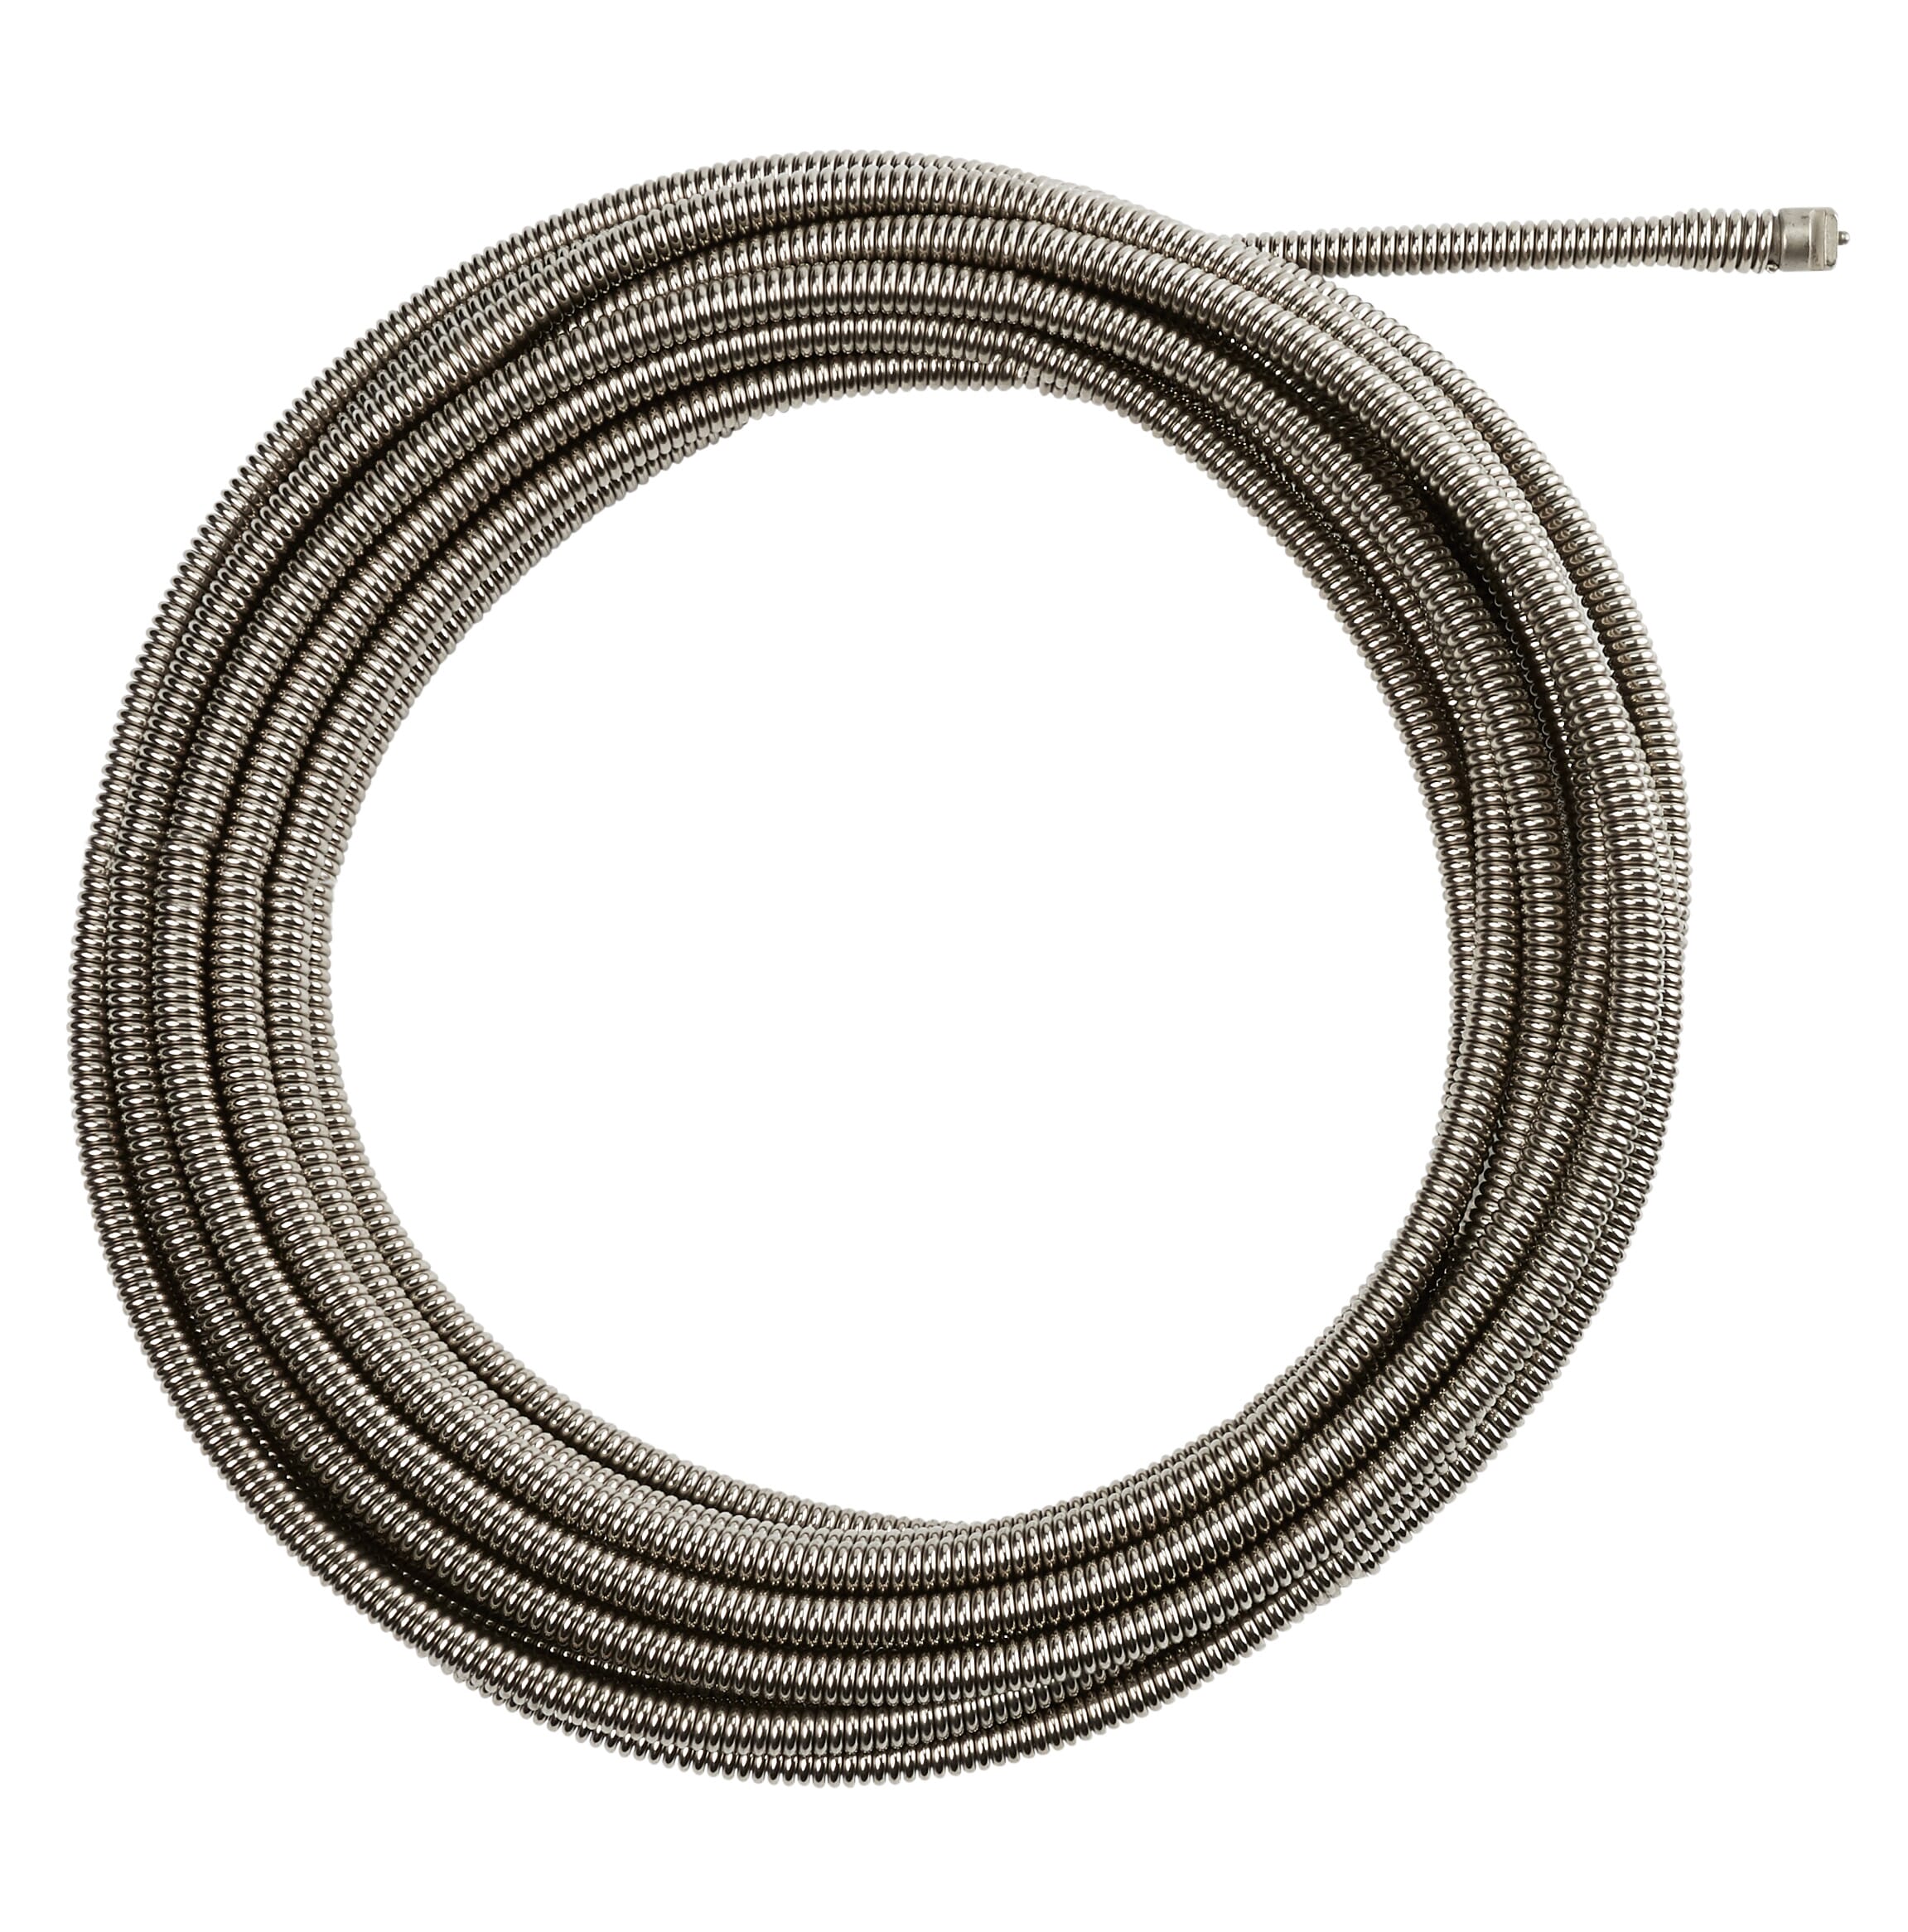 Milwaukee® 48-53-2675 Inner Core Coupling Drain Cleaning Cable, 3/8 in, Steel, For Use With Drain Cleaning Machines, 1-1/4 to 2-1/2 in Drain Line